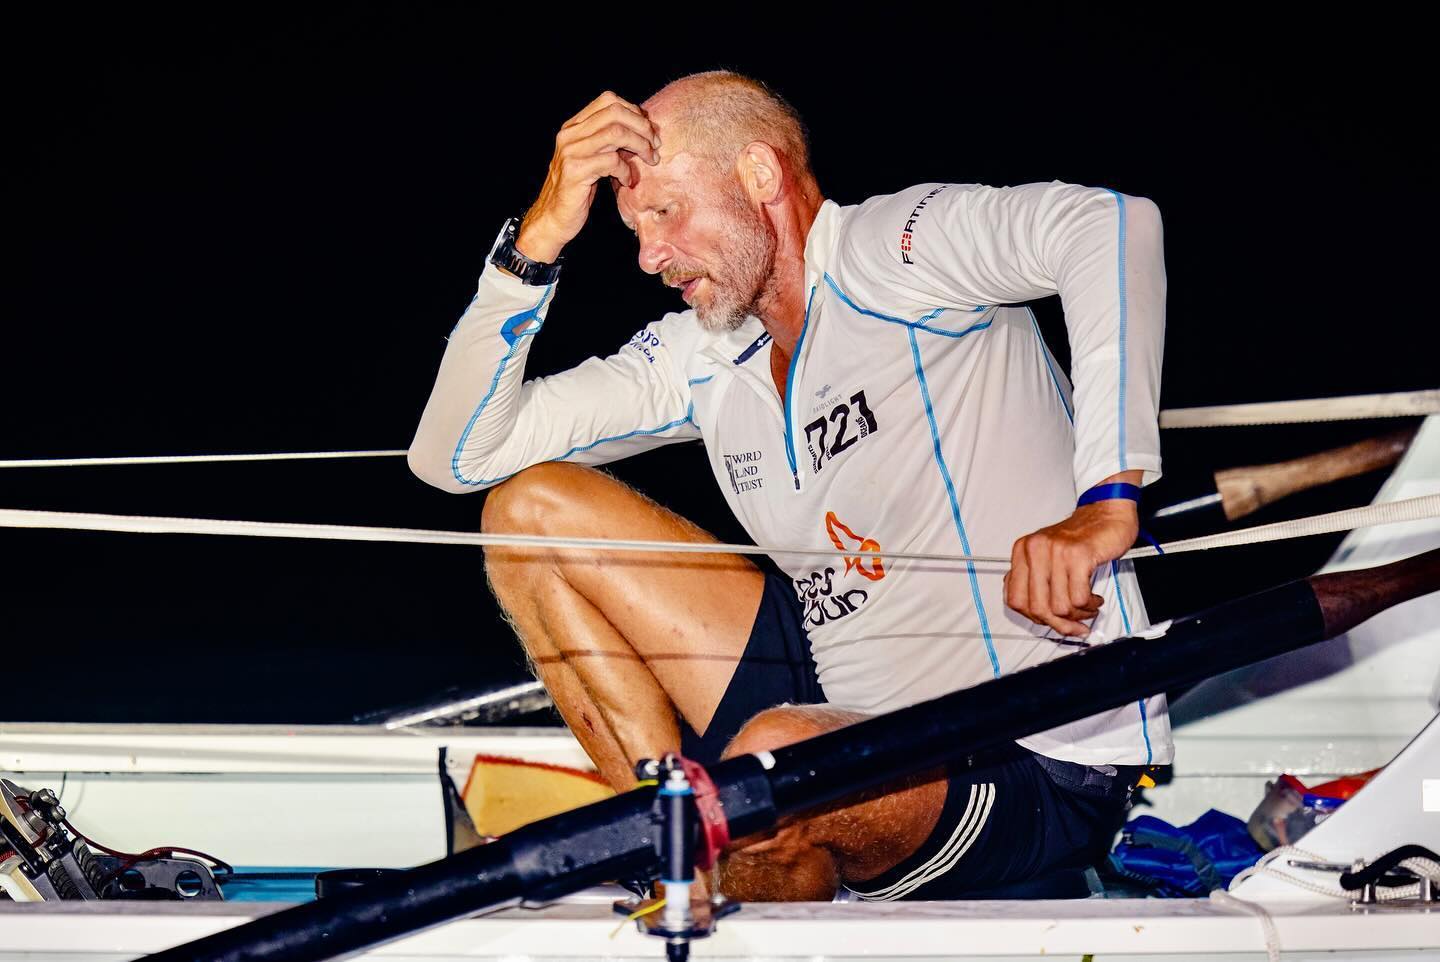 Man sits tired on a rowing boat.